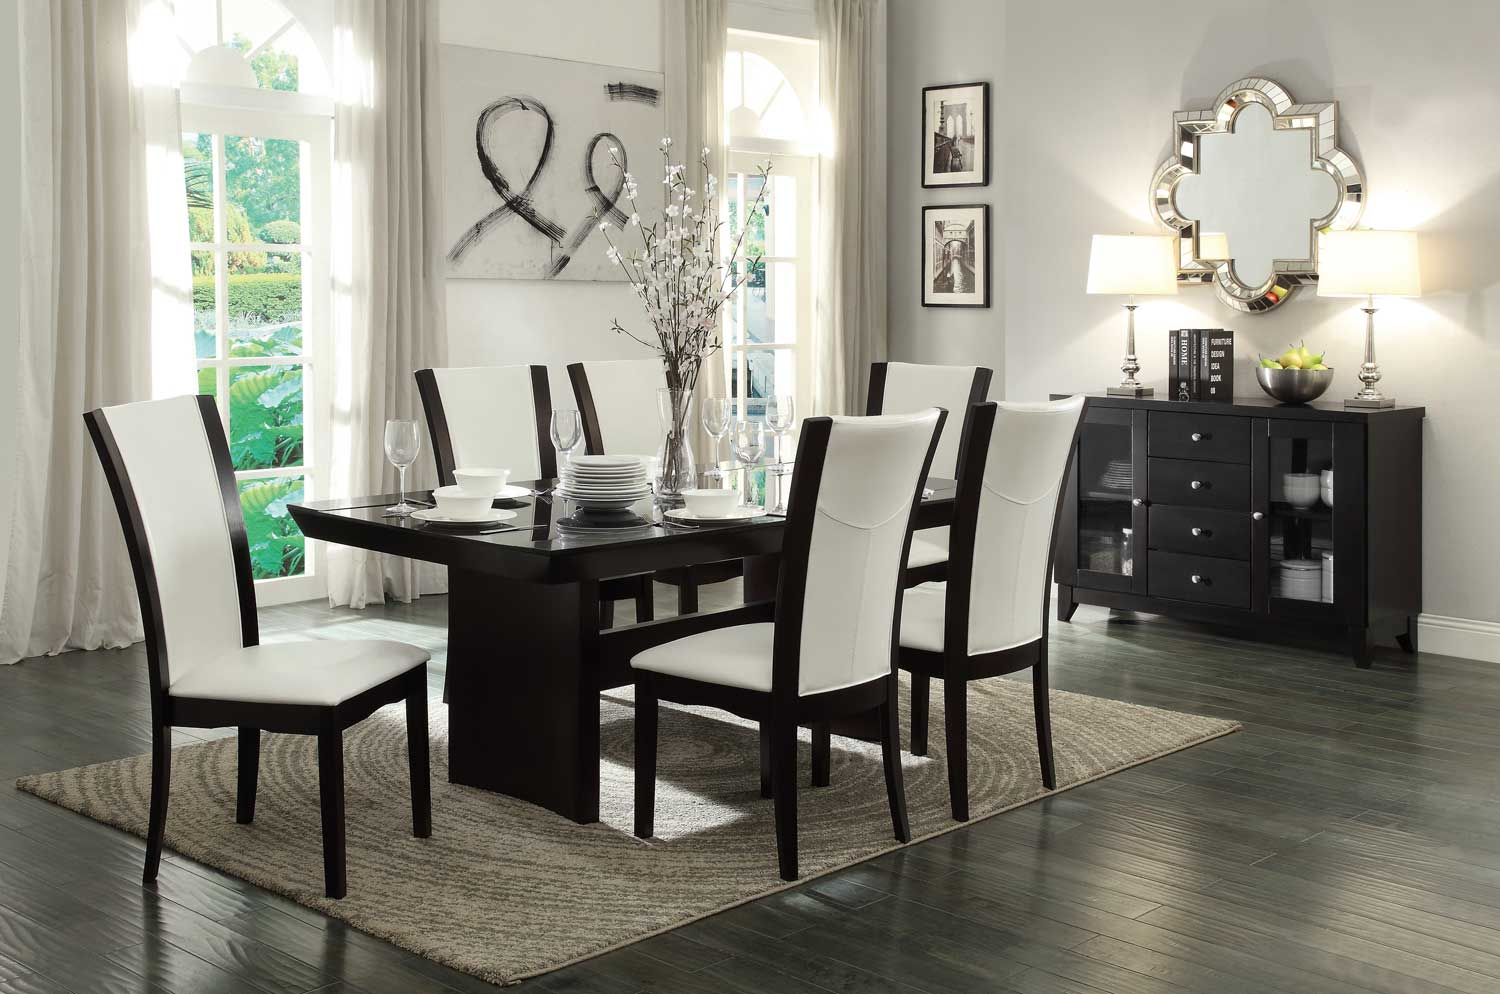 Homelegance Daisy 7pc White Glass Top Dining Table Set in dimensions 1500 X 994